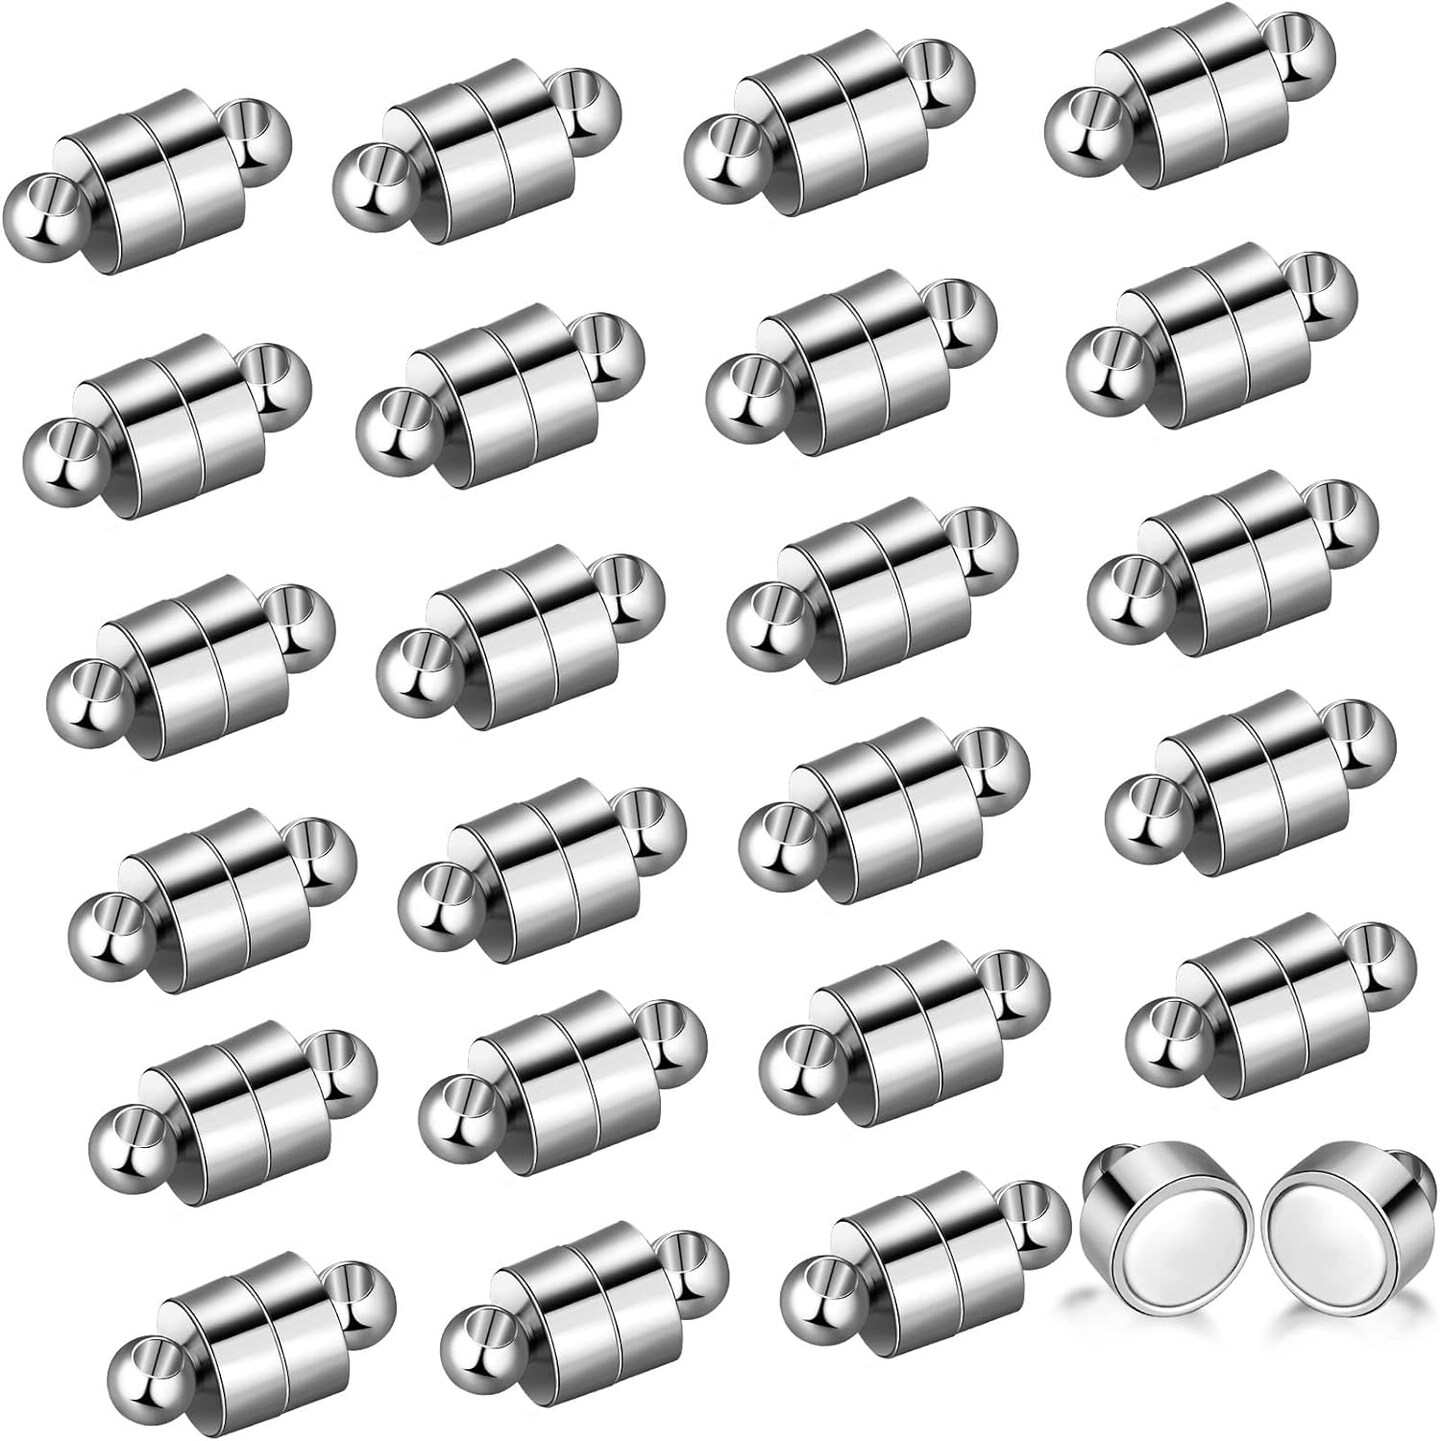 24 Pairs Magnetic Necklace Bracelet Clasps Magnet Converter Jewelry Clasps Extenders Locking Clasps for Bracelet Necklace Making (Silver)